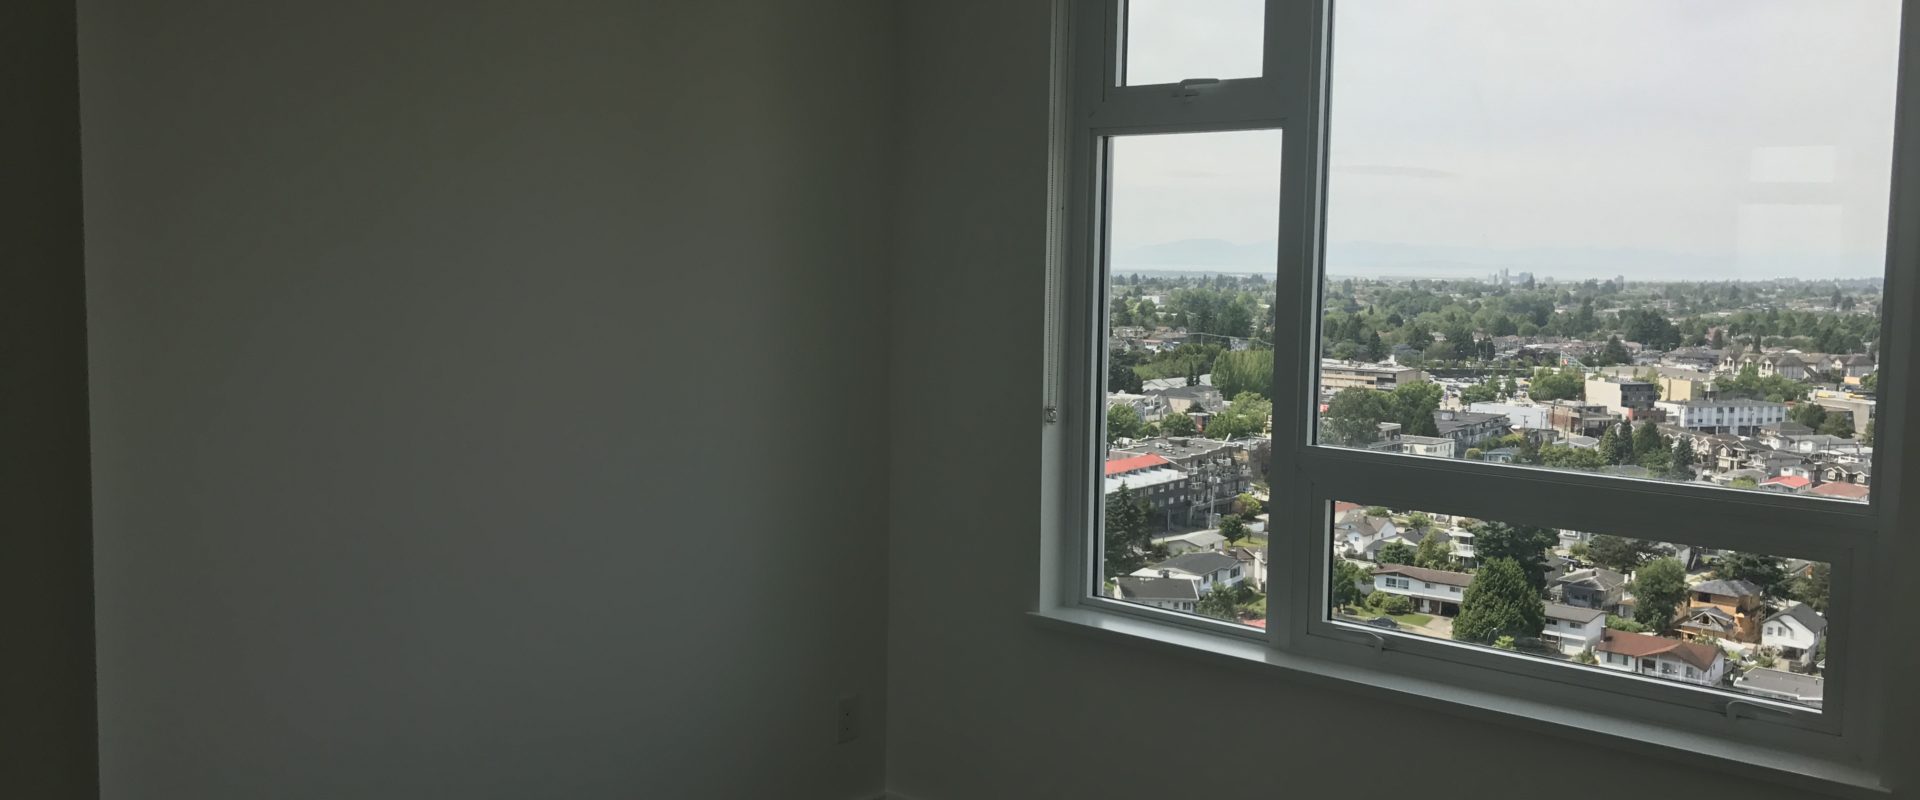 Brand New 1 bdrm+Den High Rise condo with Great views (Vancouver East)